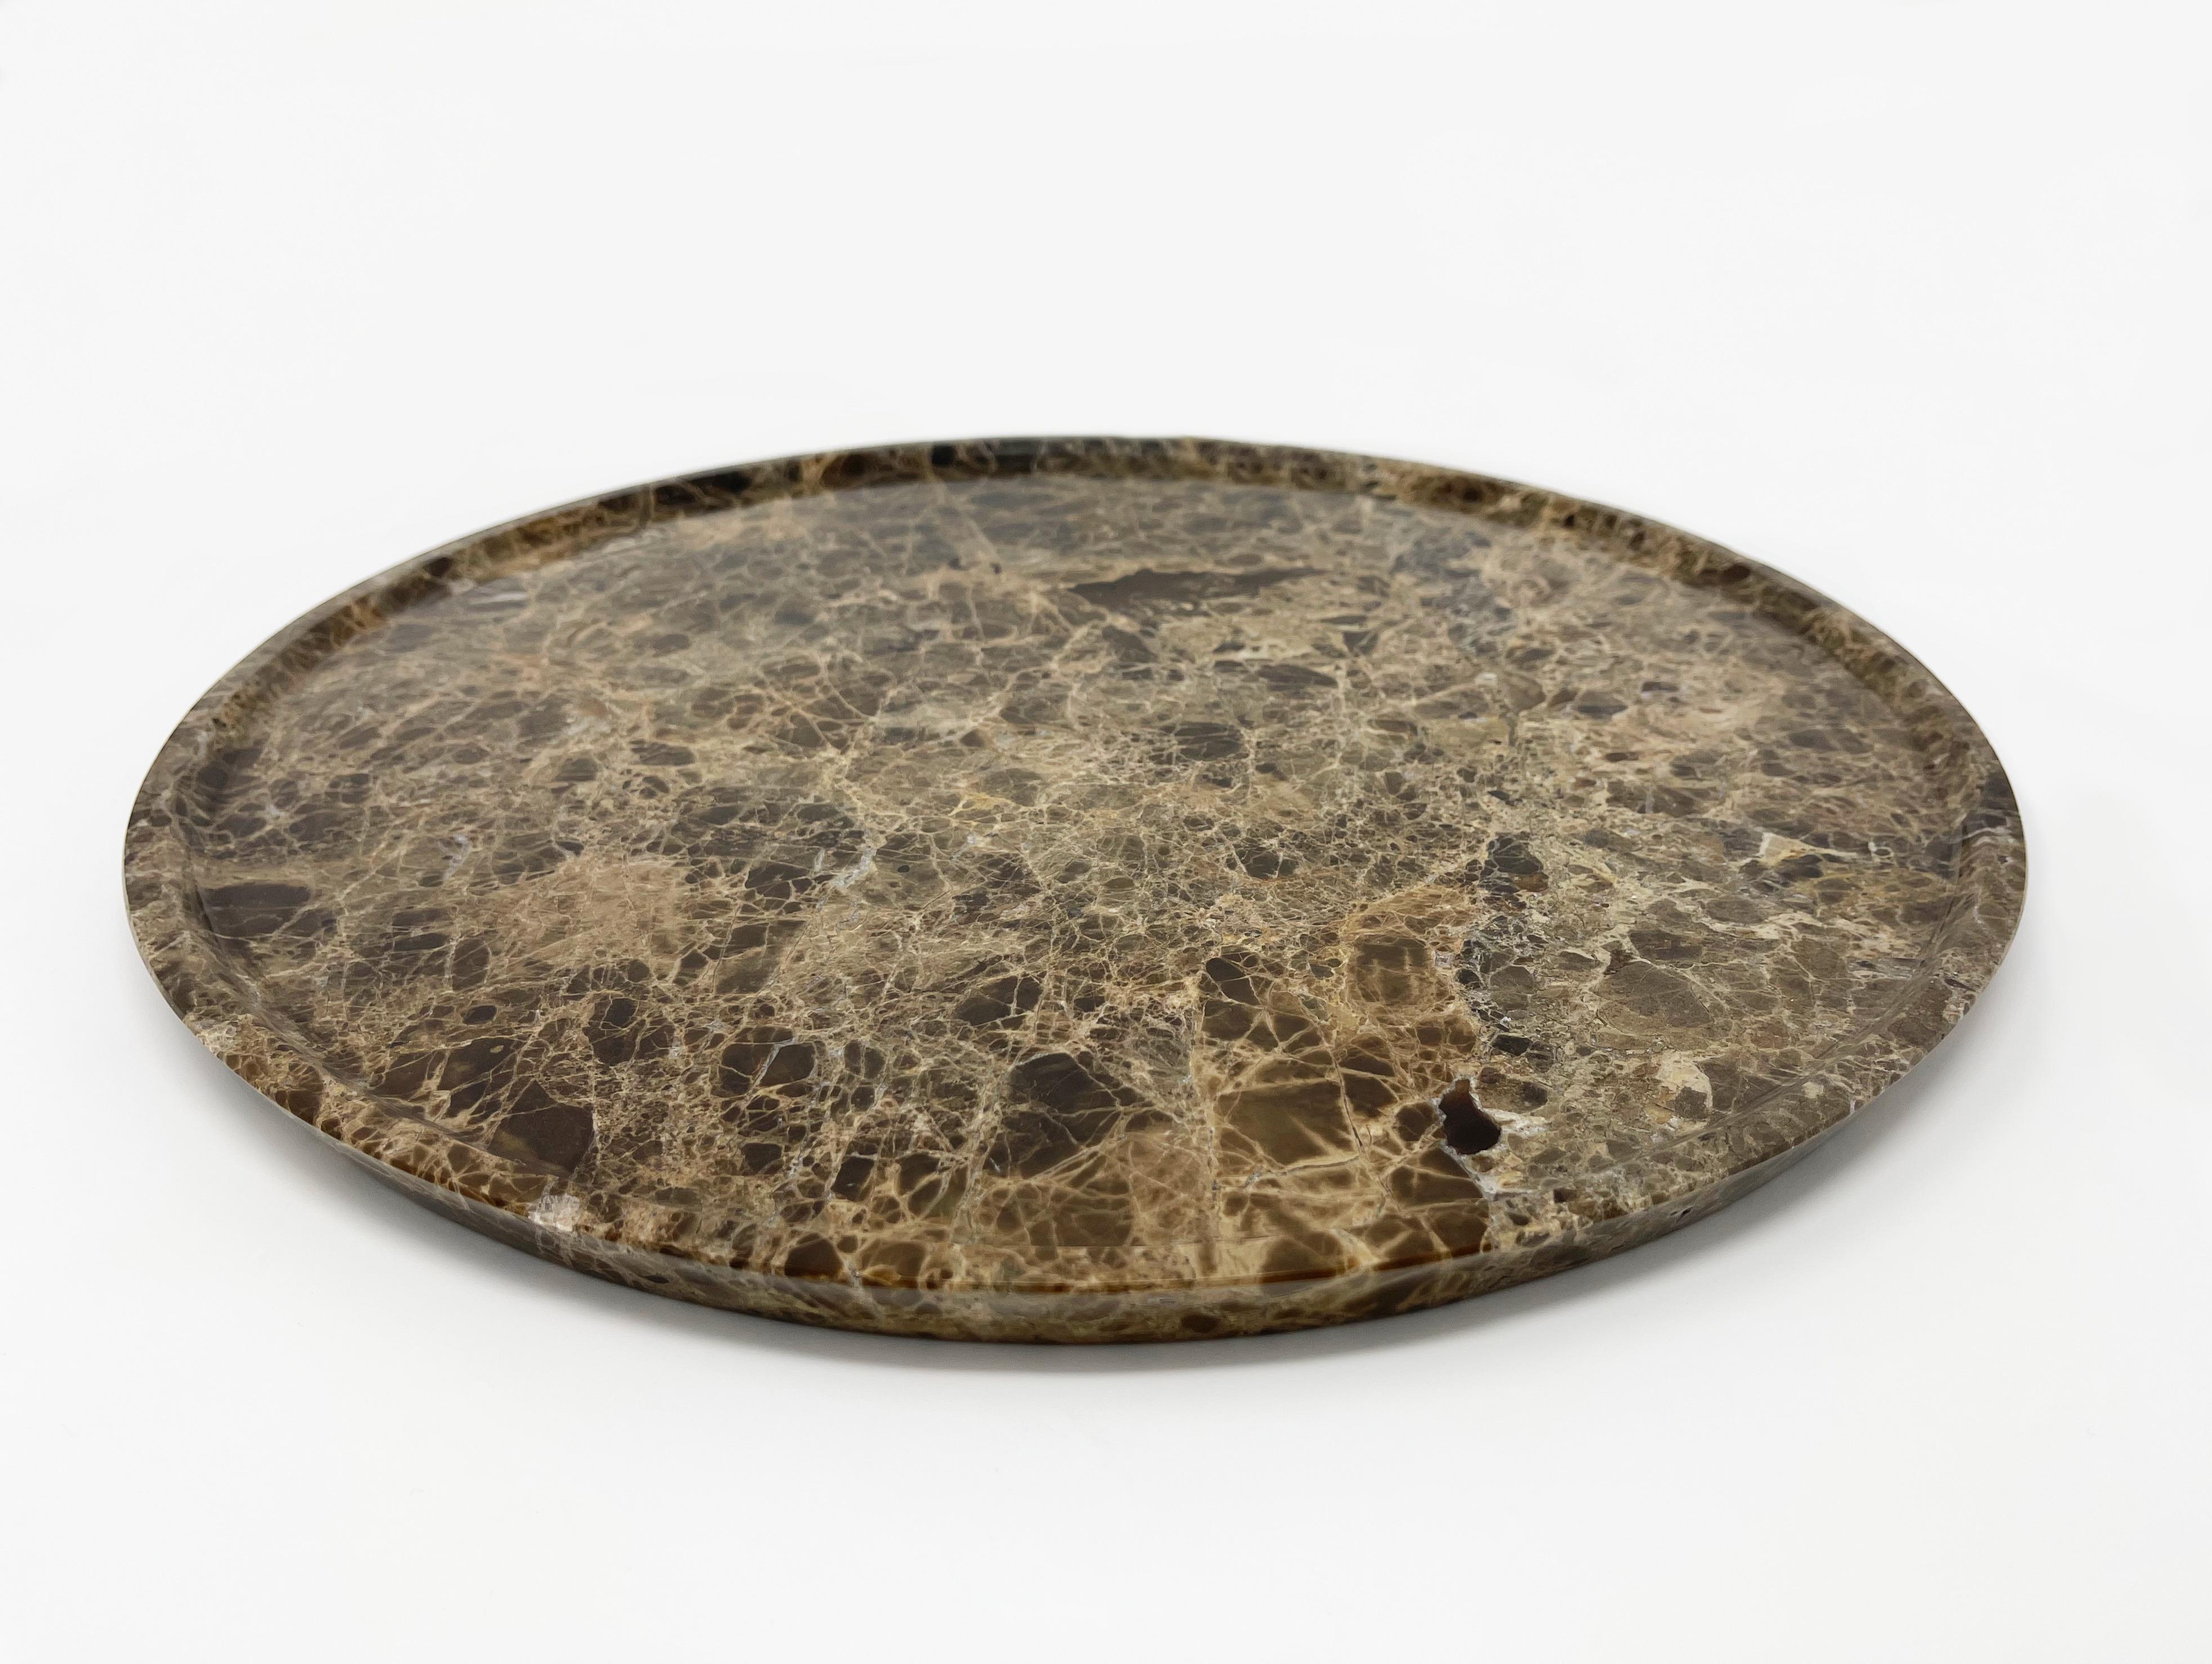 The Terra tray, made of Dark Emperador marble, can be used as a fantastic centerpiece to support a vase, or as a pocket emptier to place objects that are often scattered throughout the various rooms of our homes. 

Furthermore, you can also impress